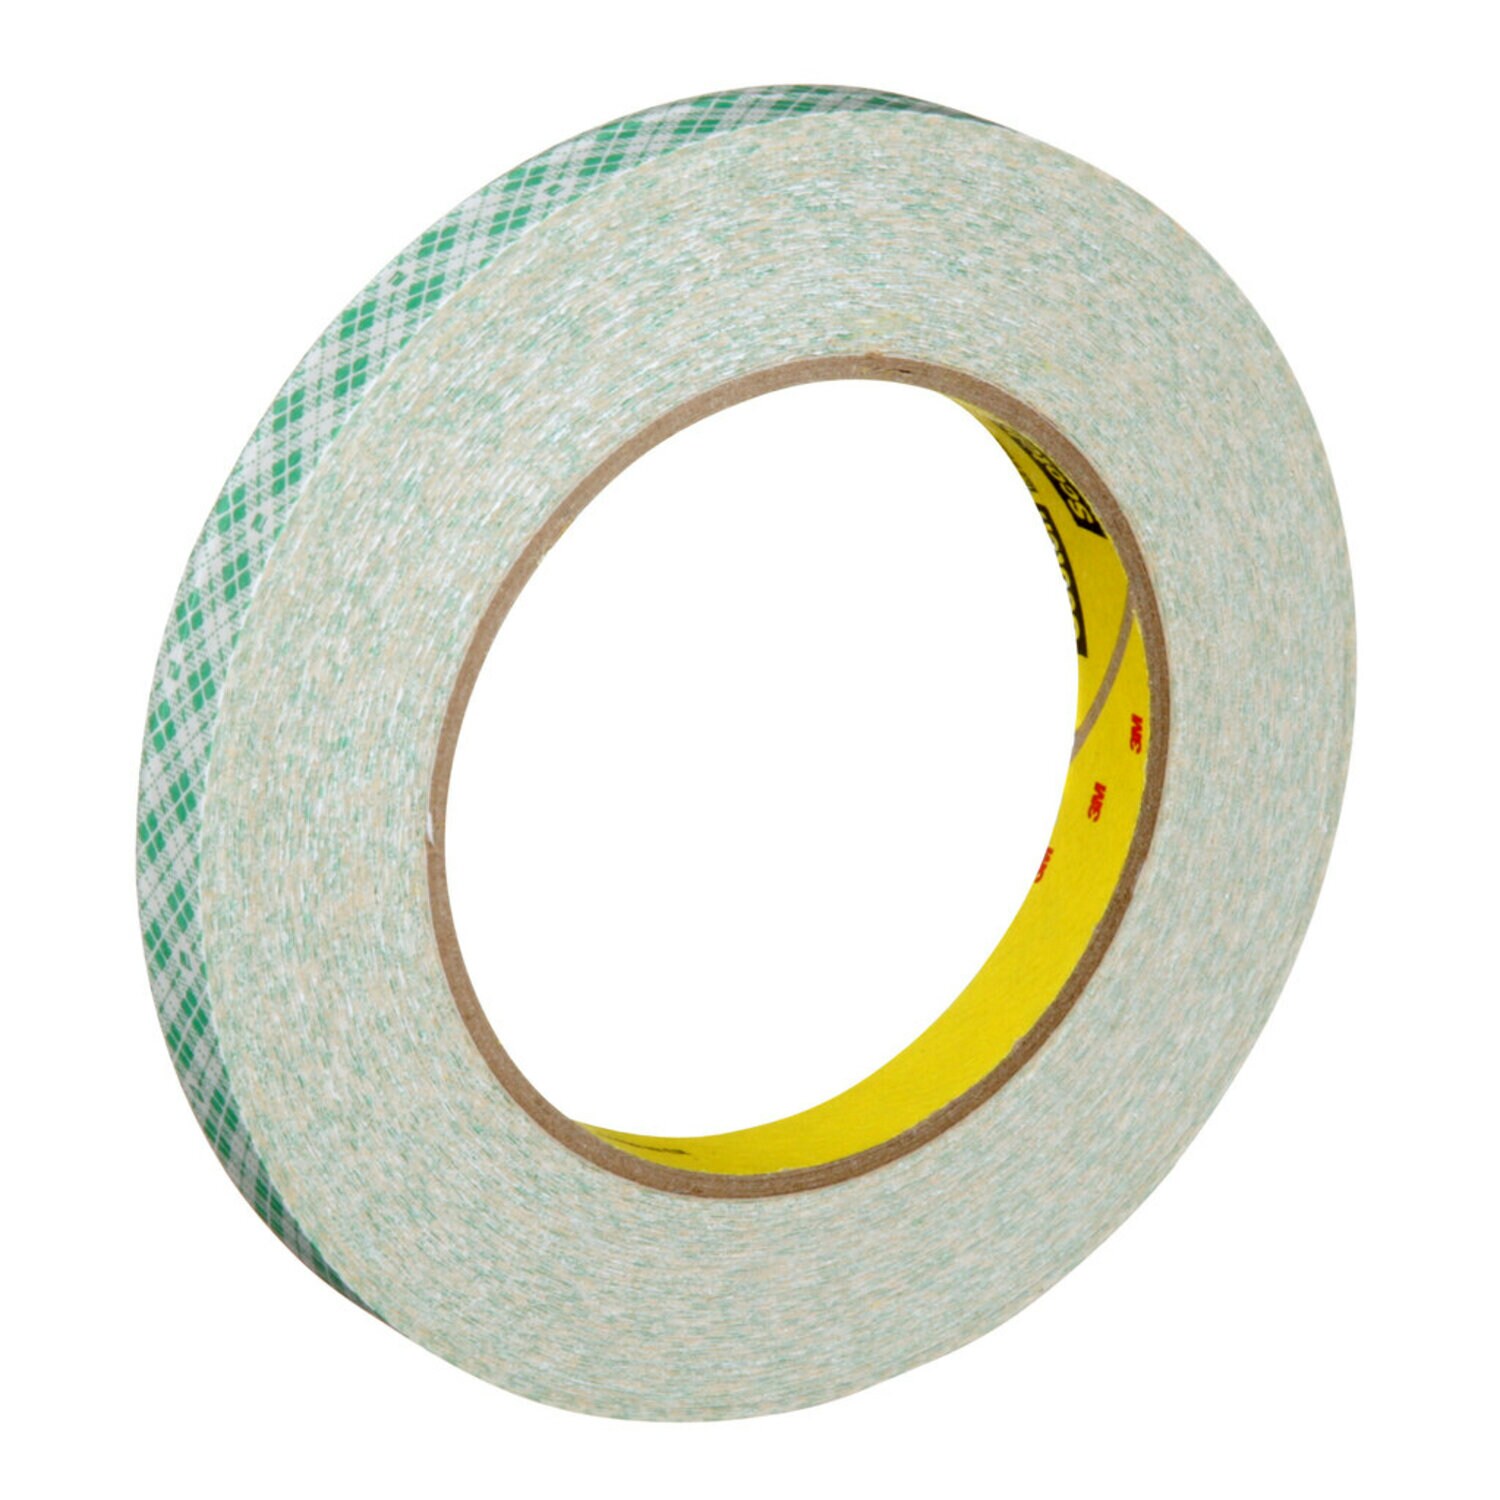 Tacky Tape - Short Cuts [(10) 12 x 8.5 Double-Sided Adhesive